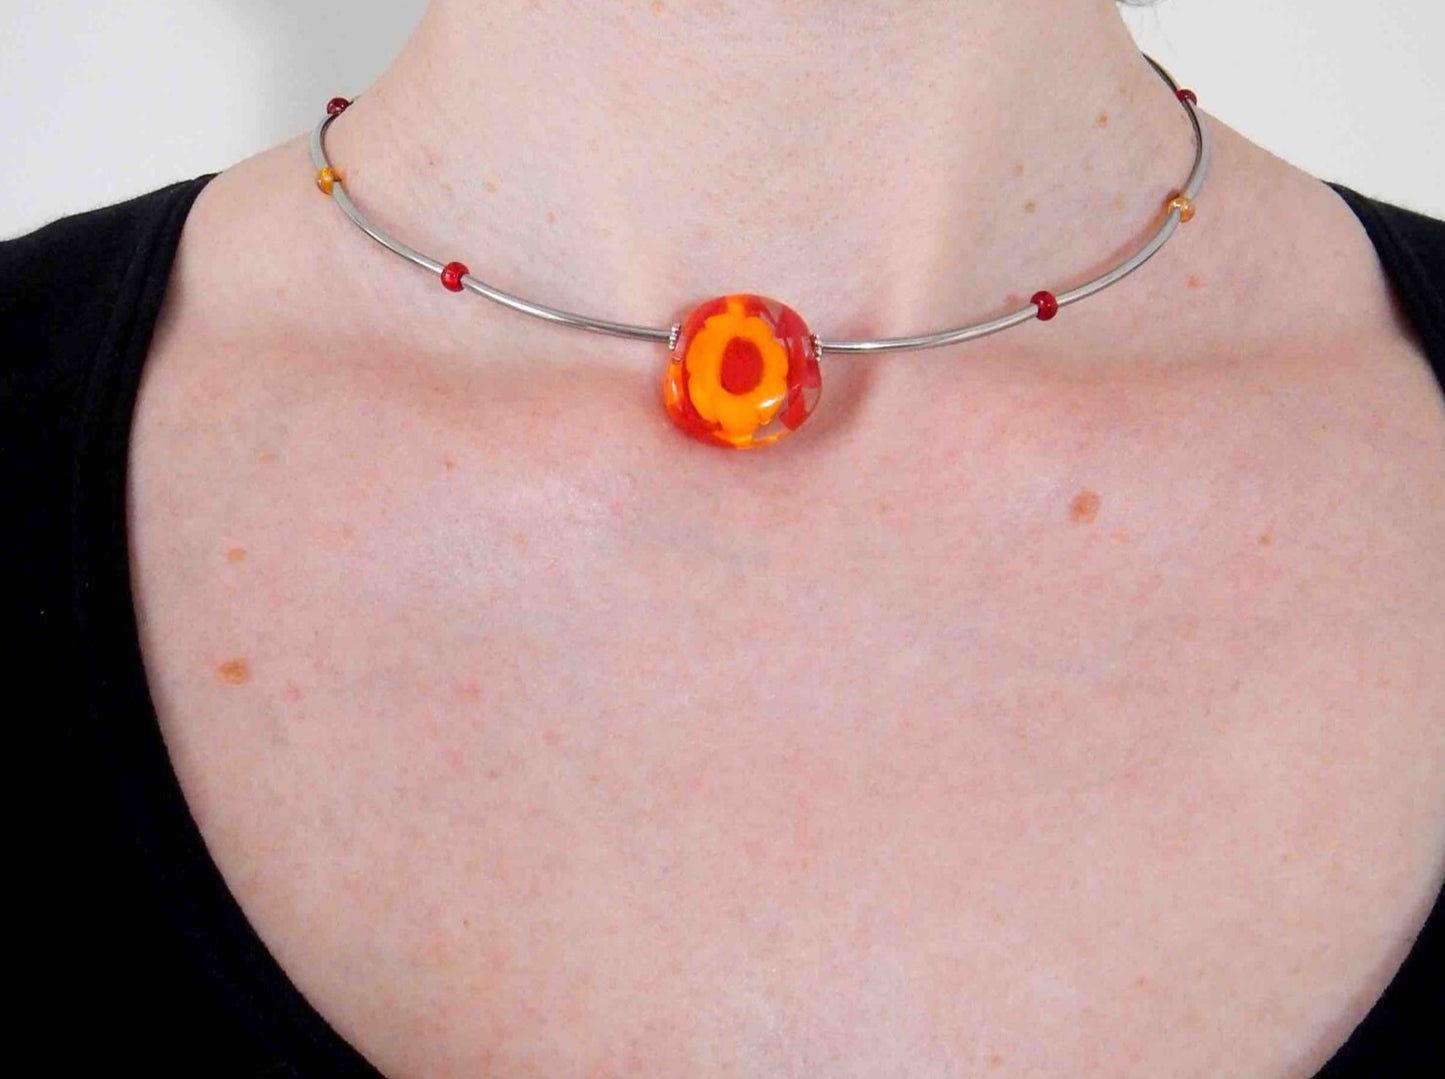 Choker necklace with bright red and yellow flower murine glass bead (Murano-style glass handmade in Montreal), stainless steel tube beads and clasp